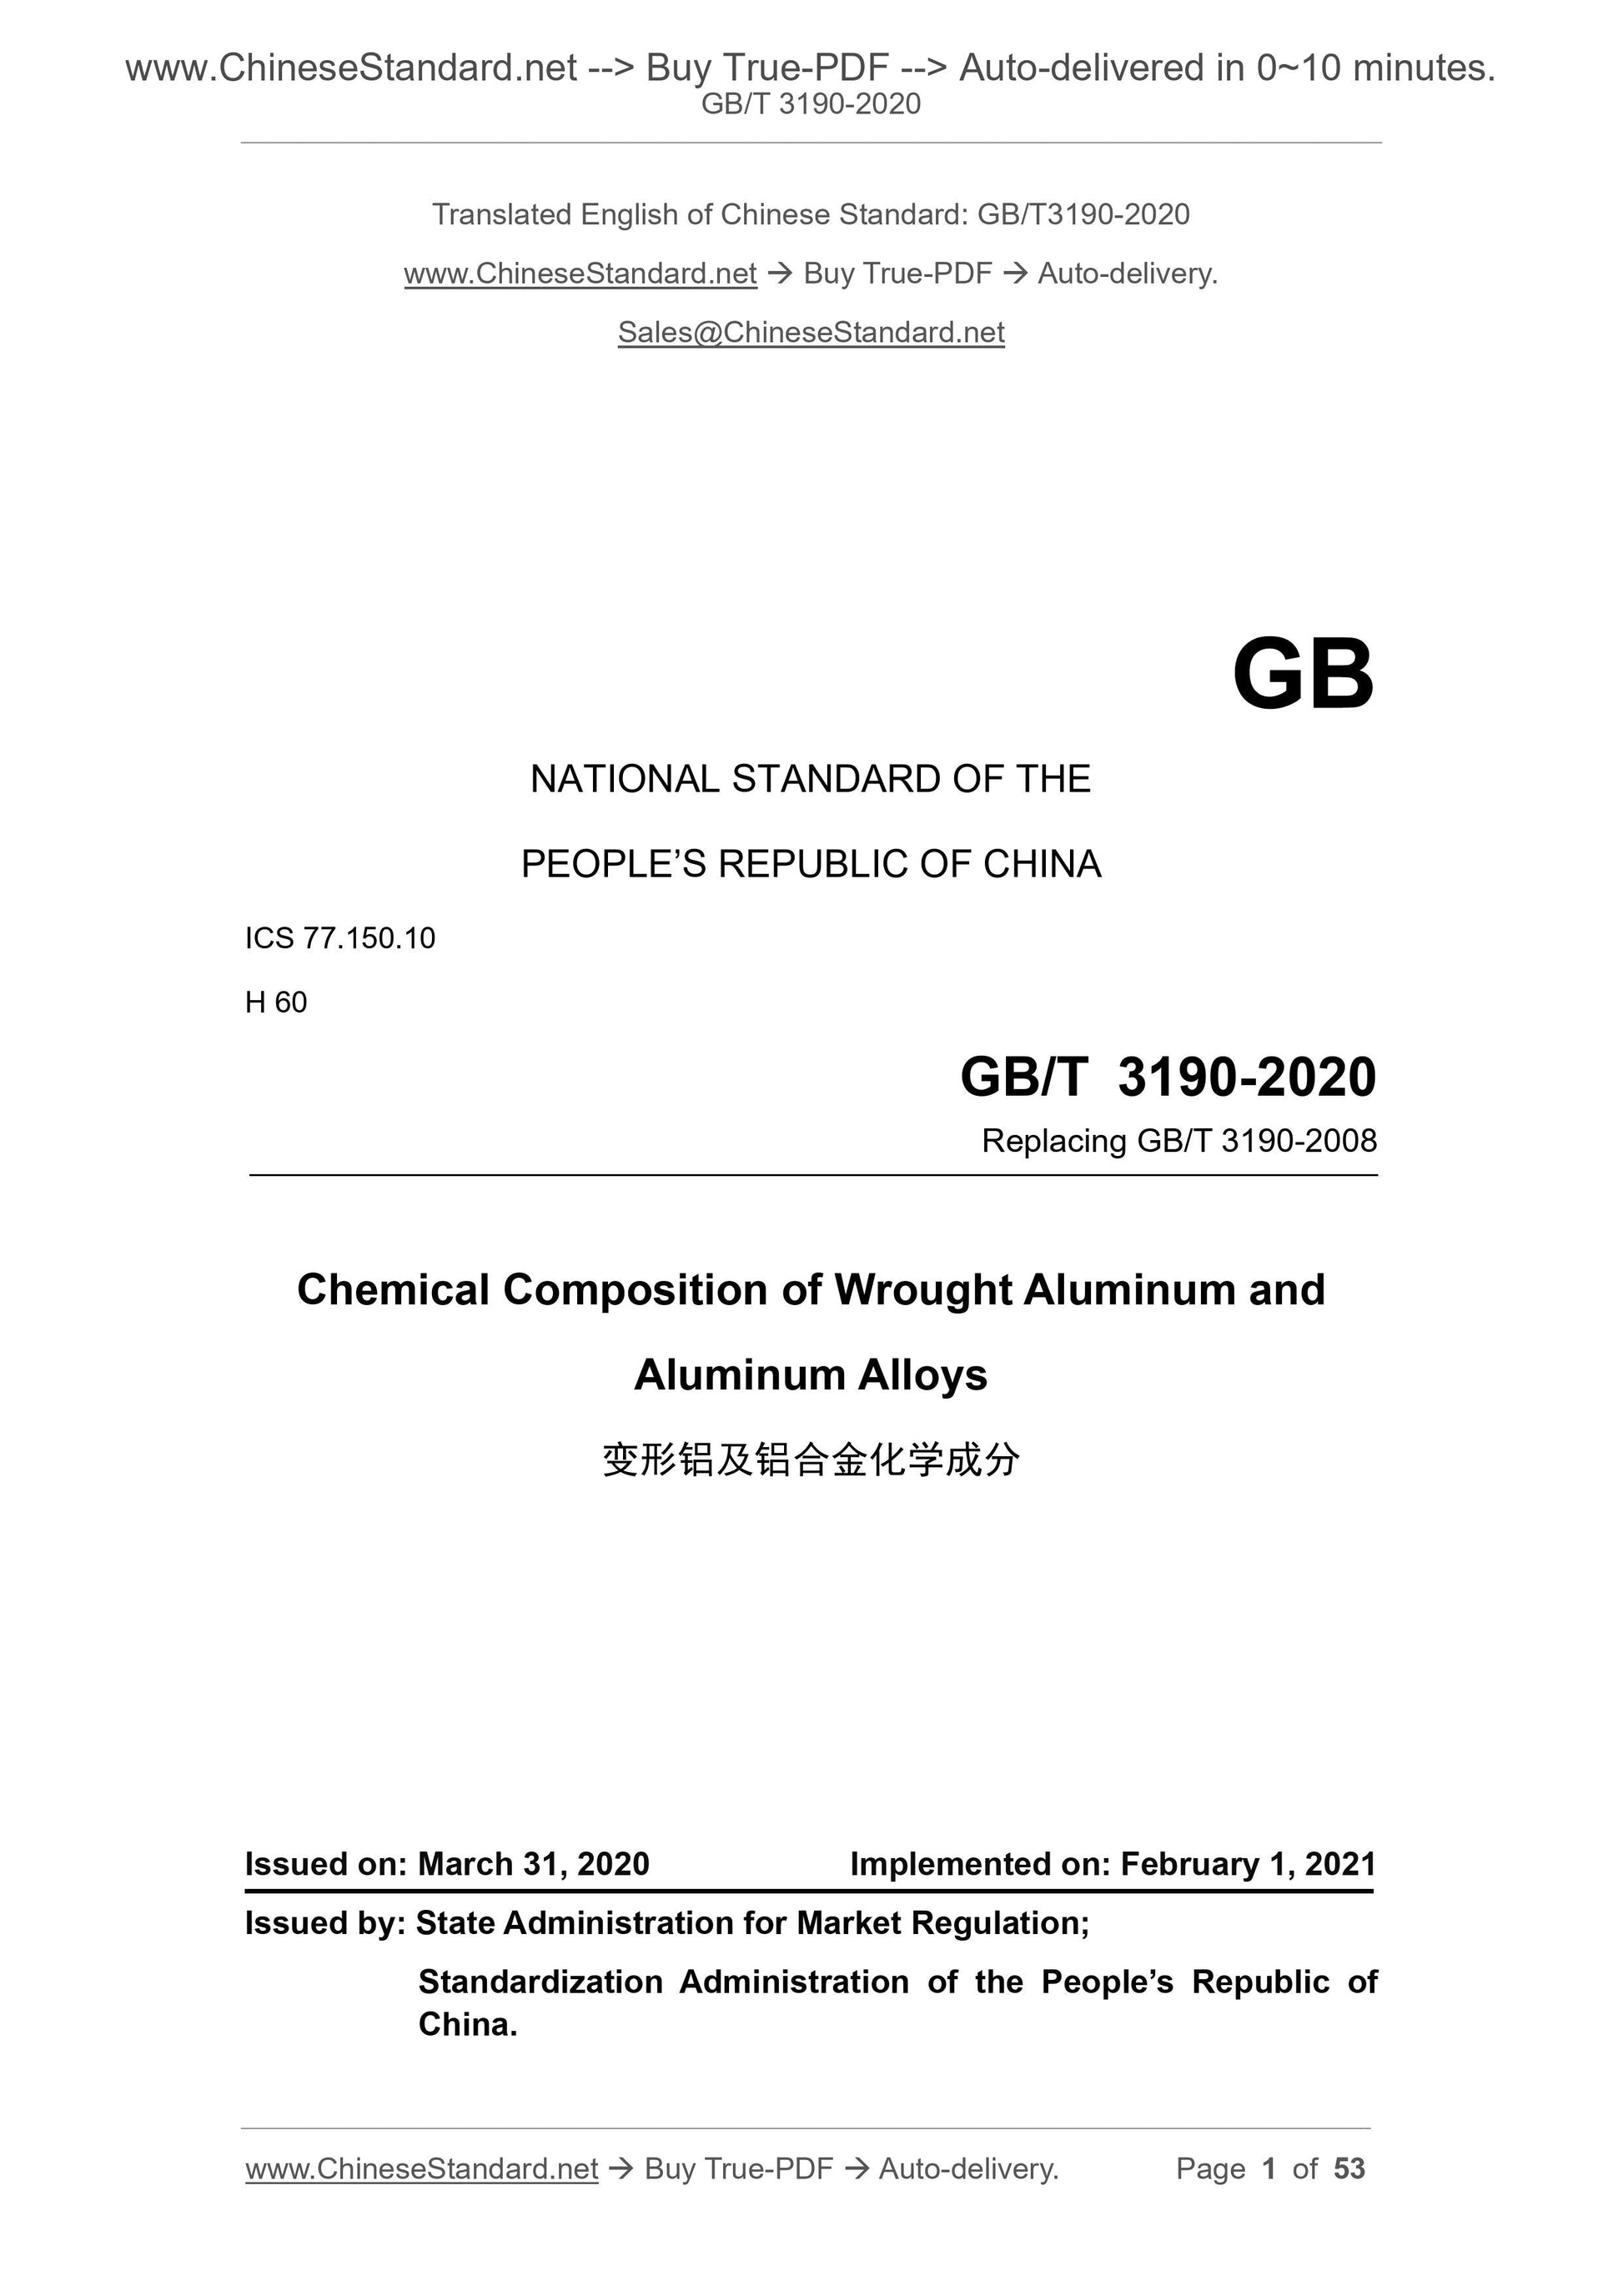 GB/T 3190-2020 Page 1